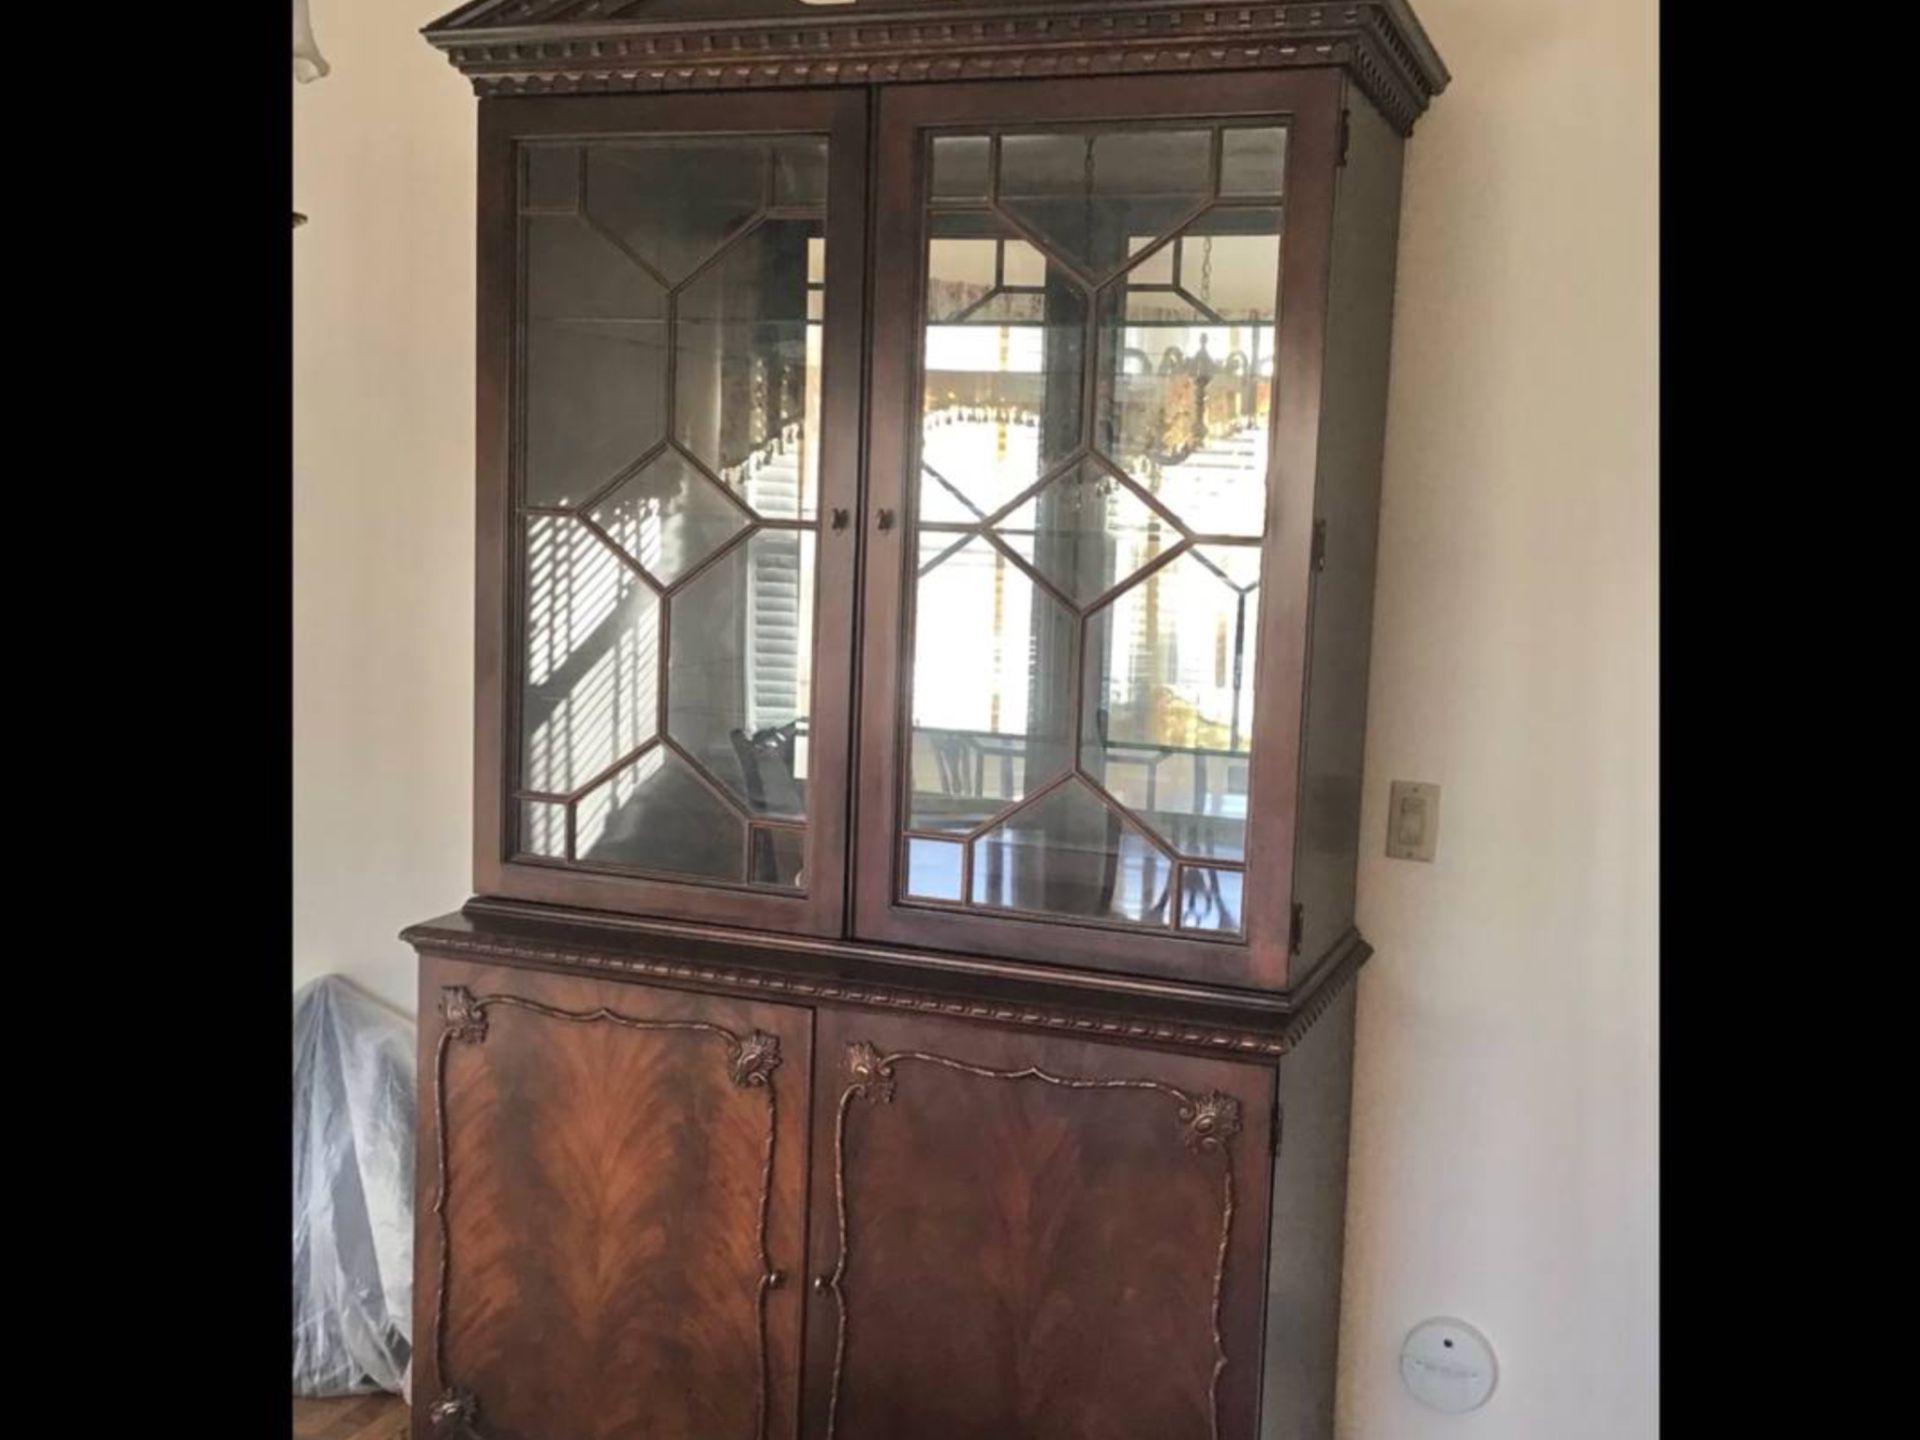 Vtg. LEXINGTON a Breakfront Dining Room Hutch Buffet China Cabinet Wood + Glass Shelves + Mirror Gorgeous 